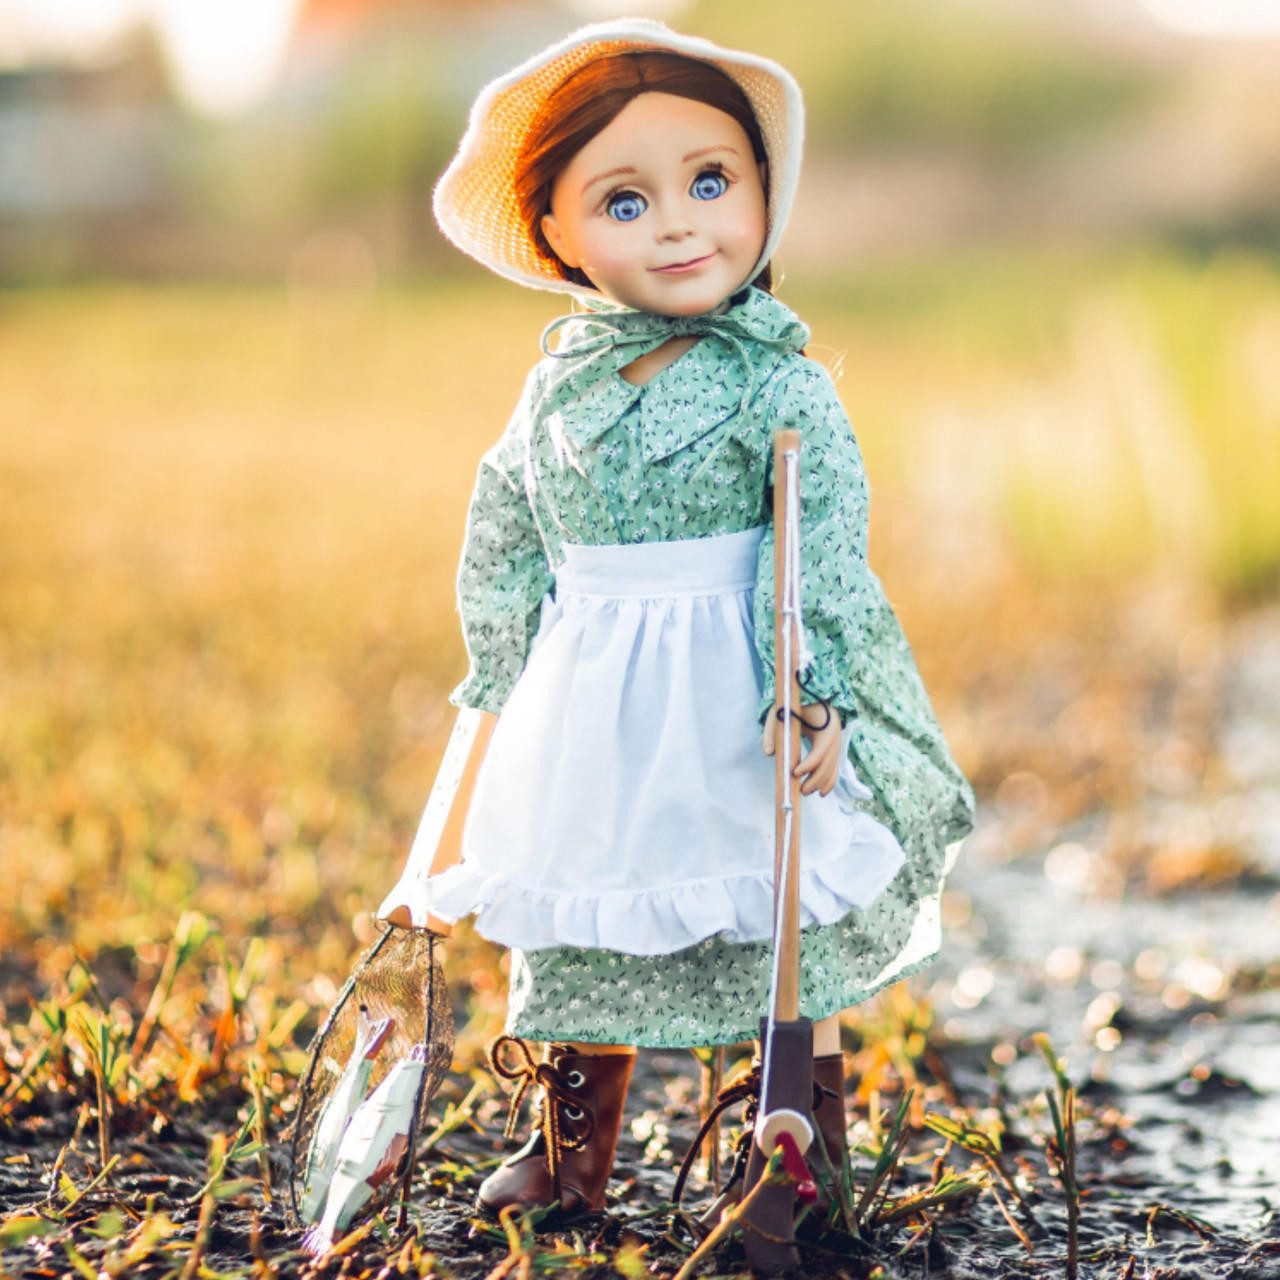 Little House Outfit&Fishing Set,Accessories for 18-In Doll